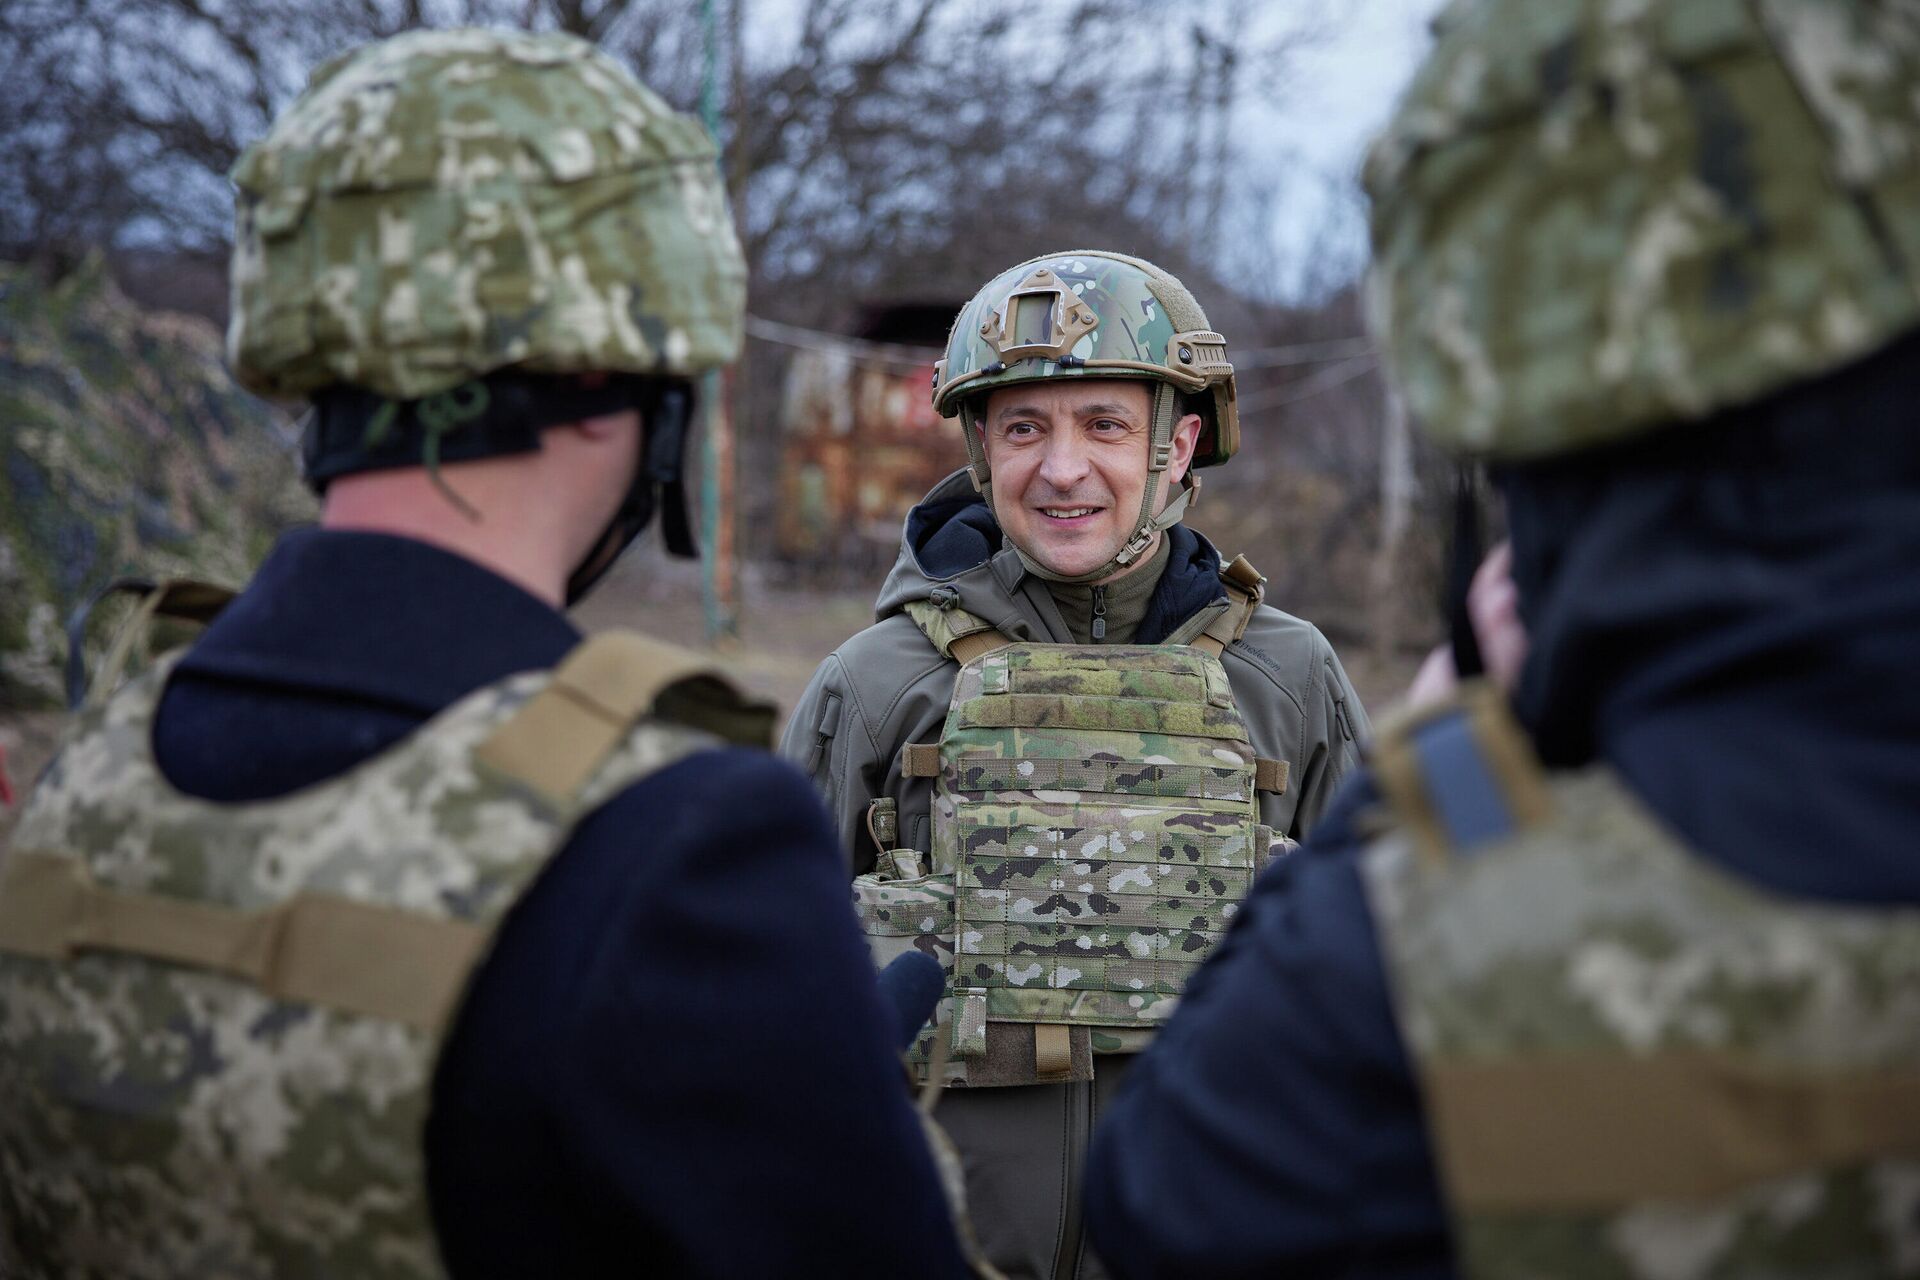 President of Ukraine Volodymyr Zelensky during a visit of Ukrainian troops to their positions in Donbass - RIA Novosti, 1920, 23/05/2022